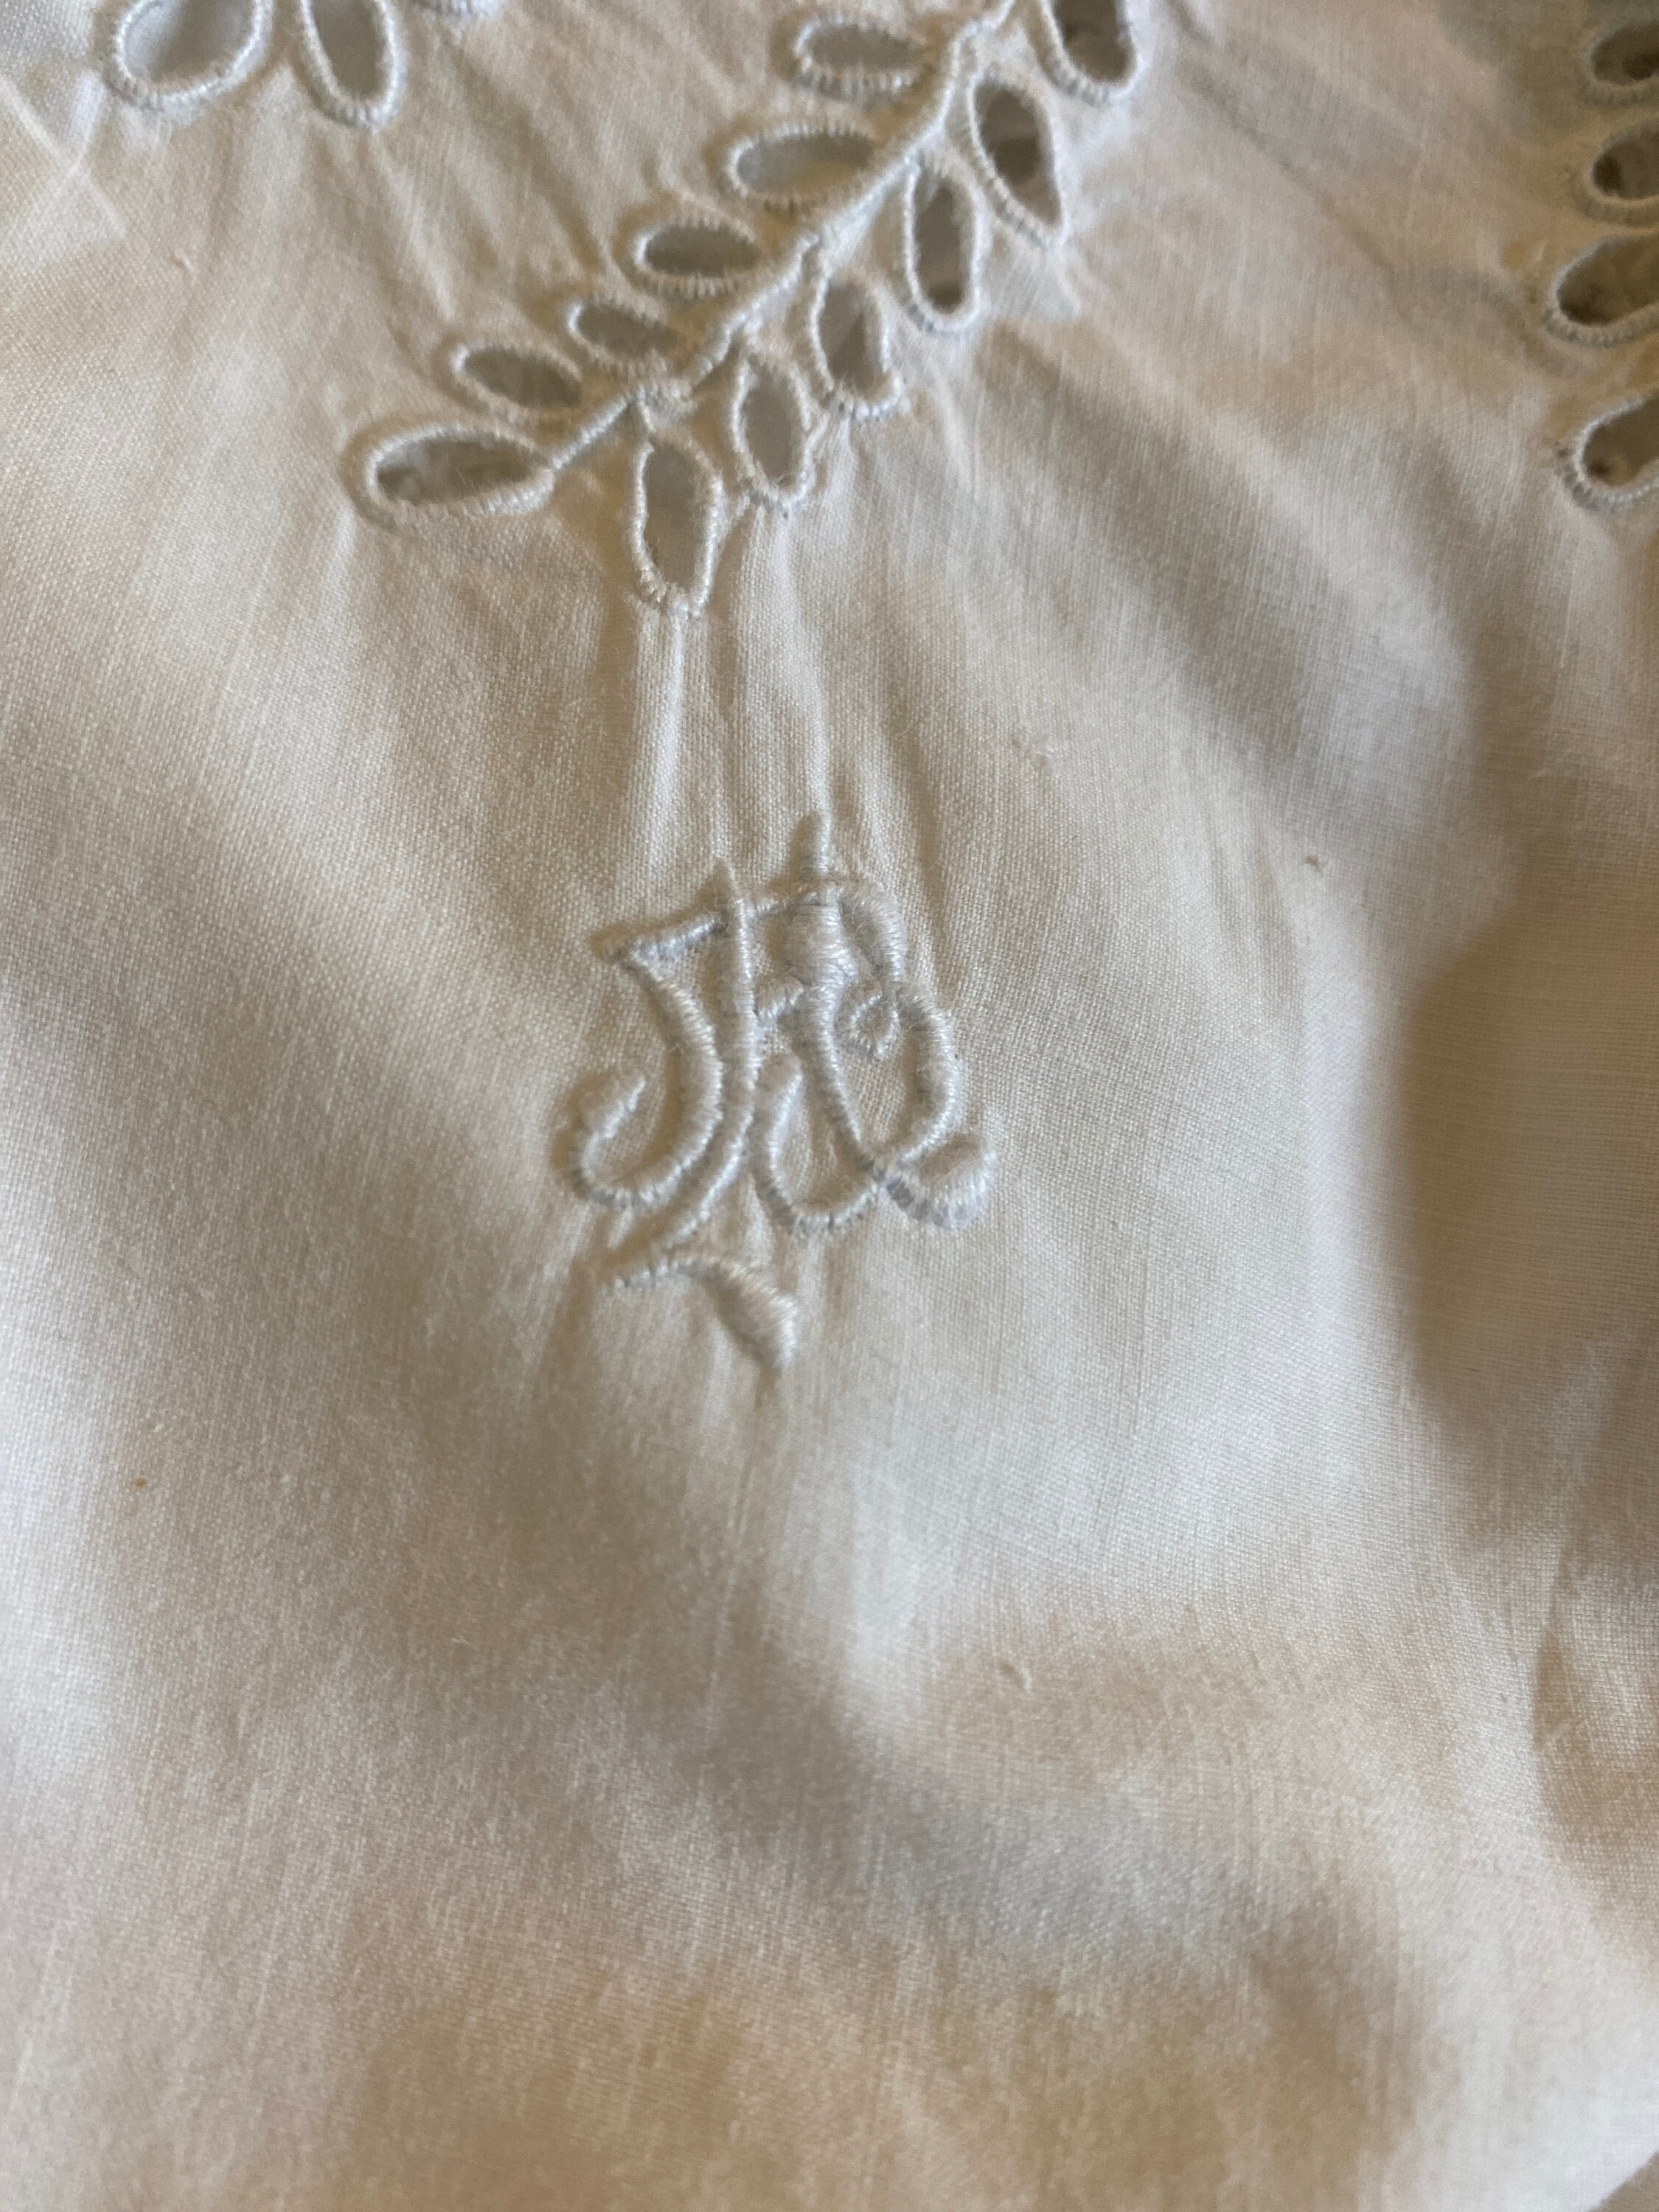 Antique Embroidered Cutwork Lingerie Dress With Monogram . - Etsy